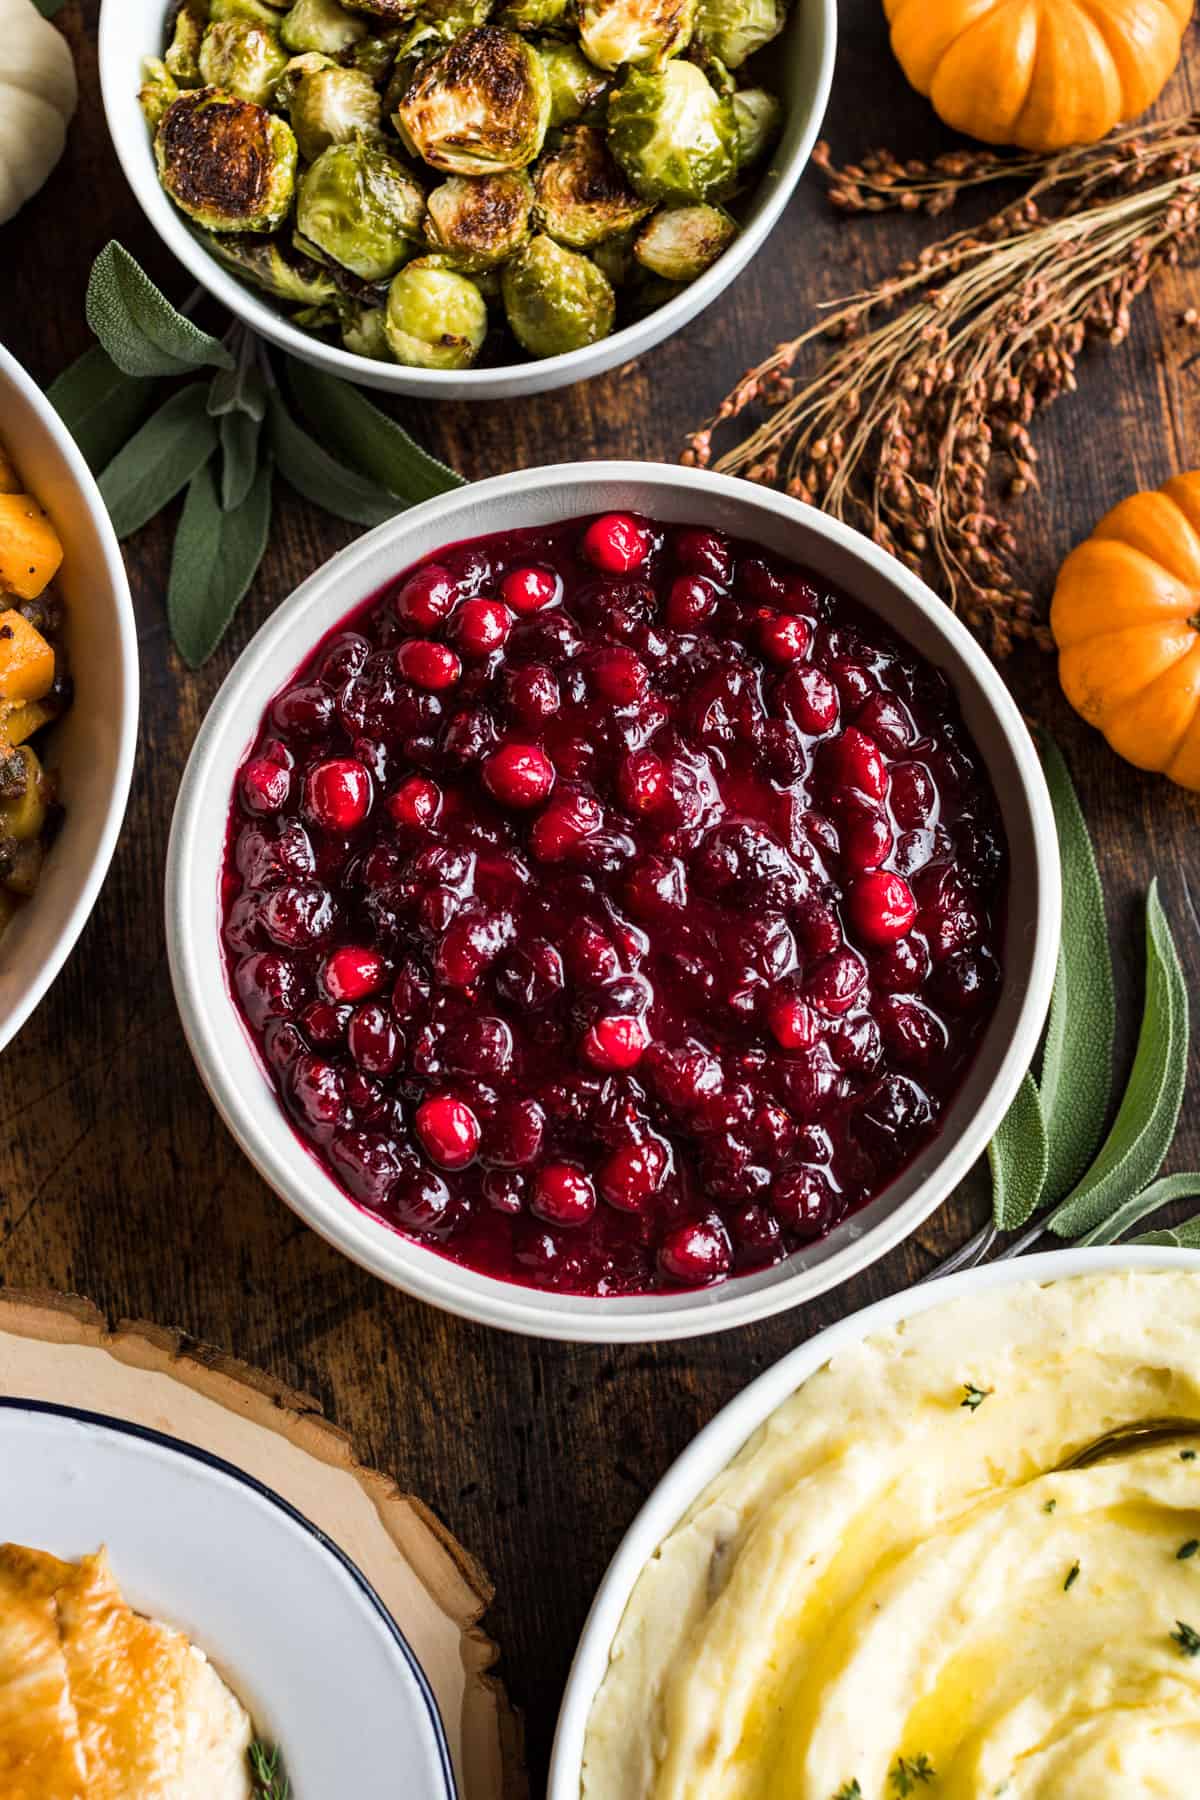 A bowl of cranberry sauce in the center surrounded by stuffing, turkey, mashed potatoes and brussels sprouts.